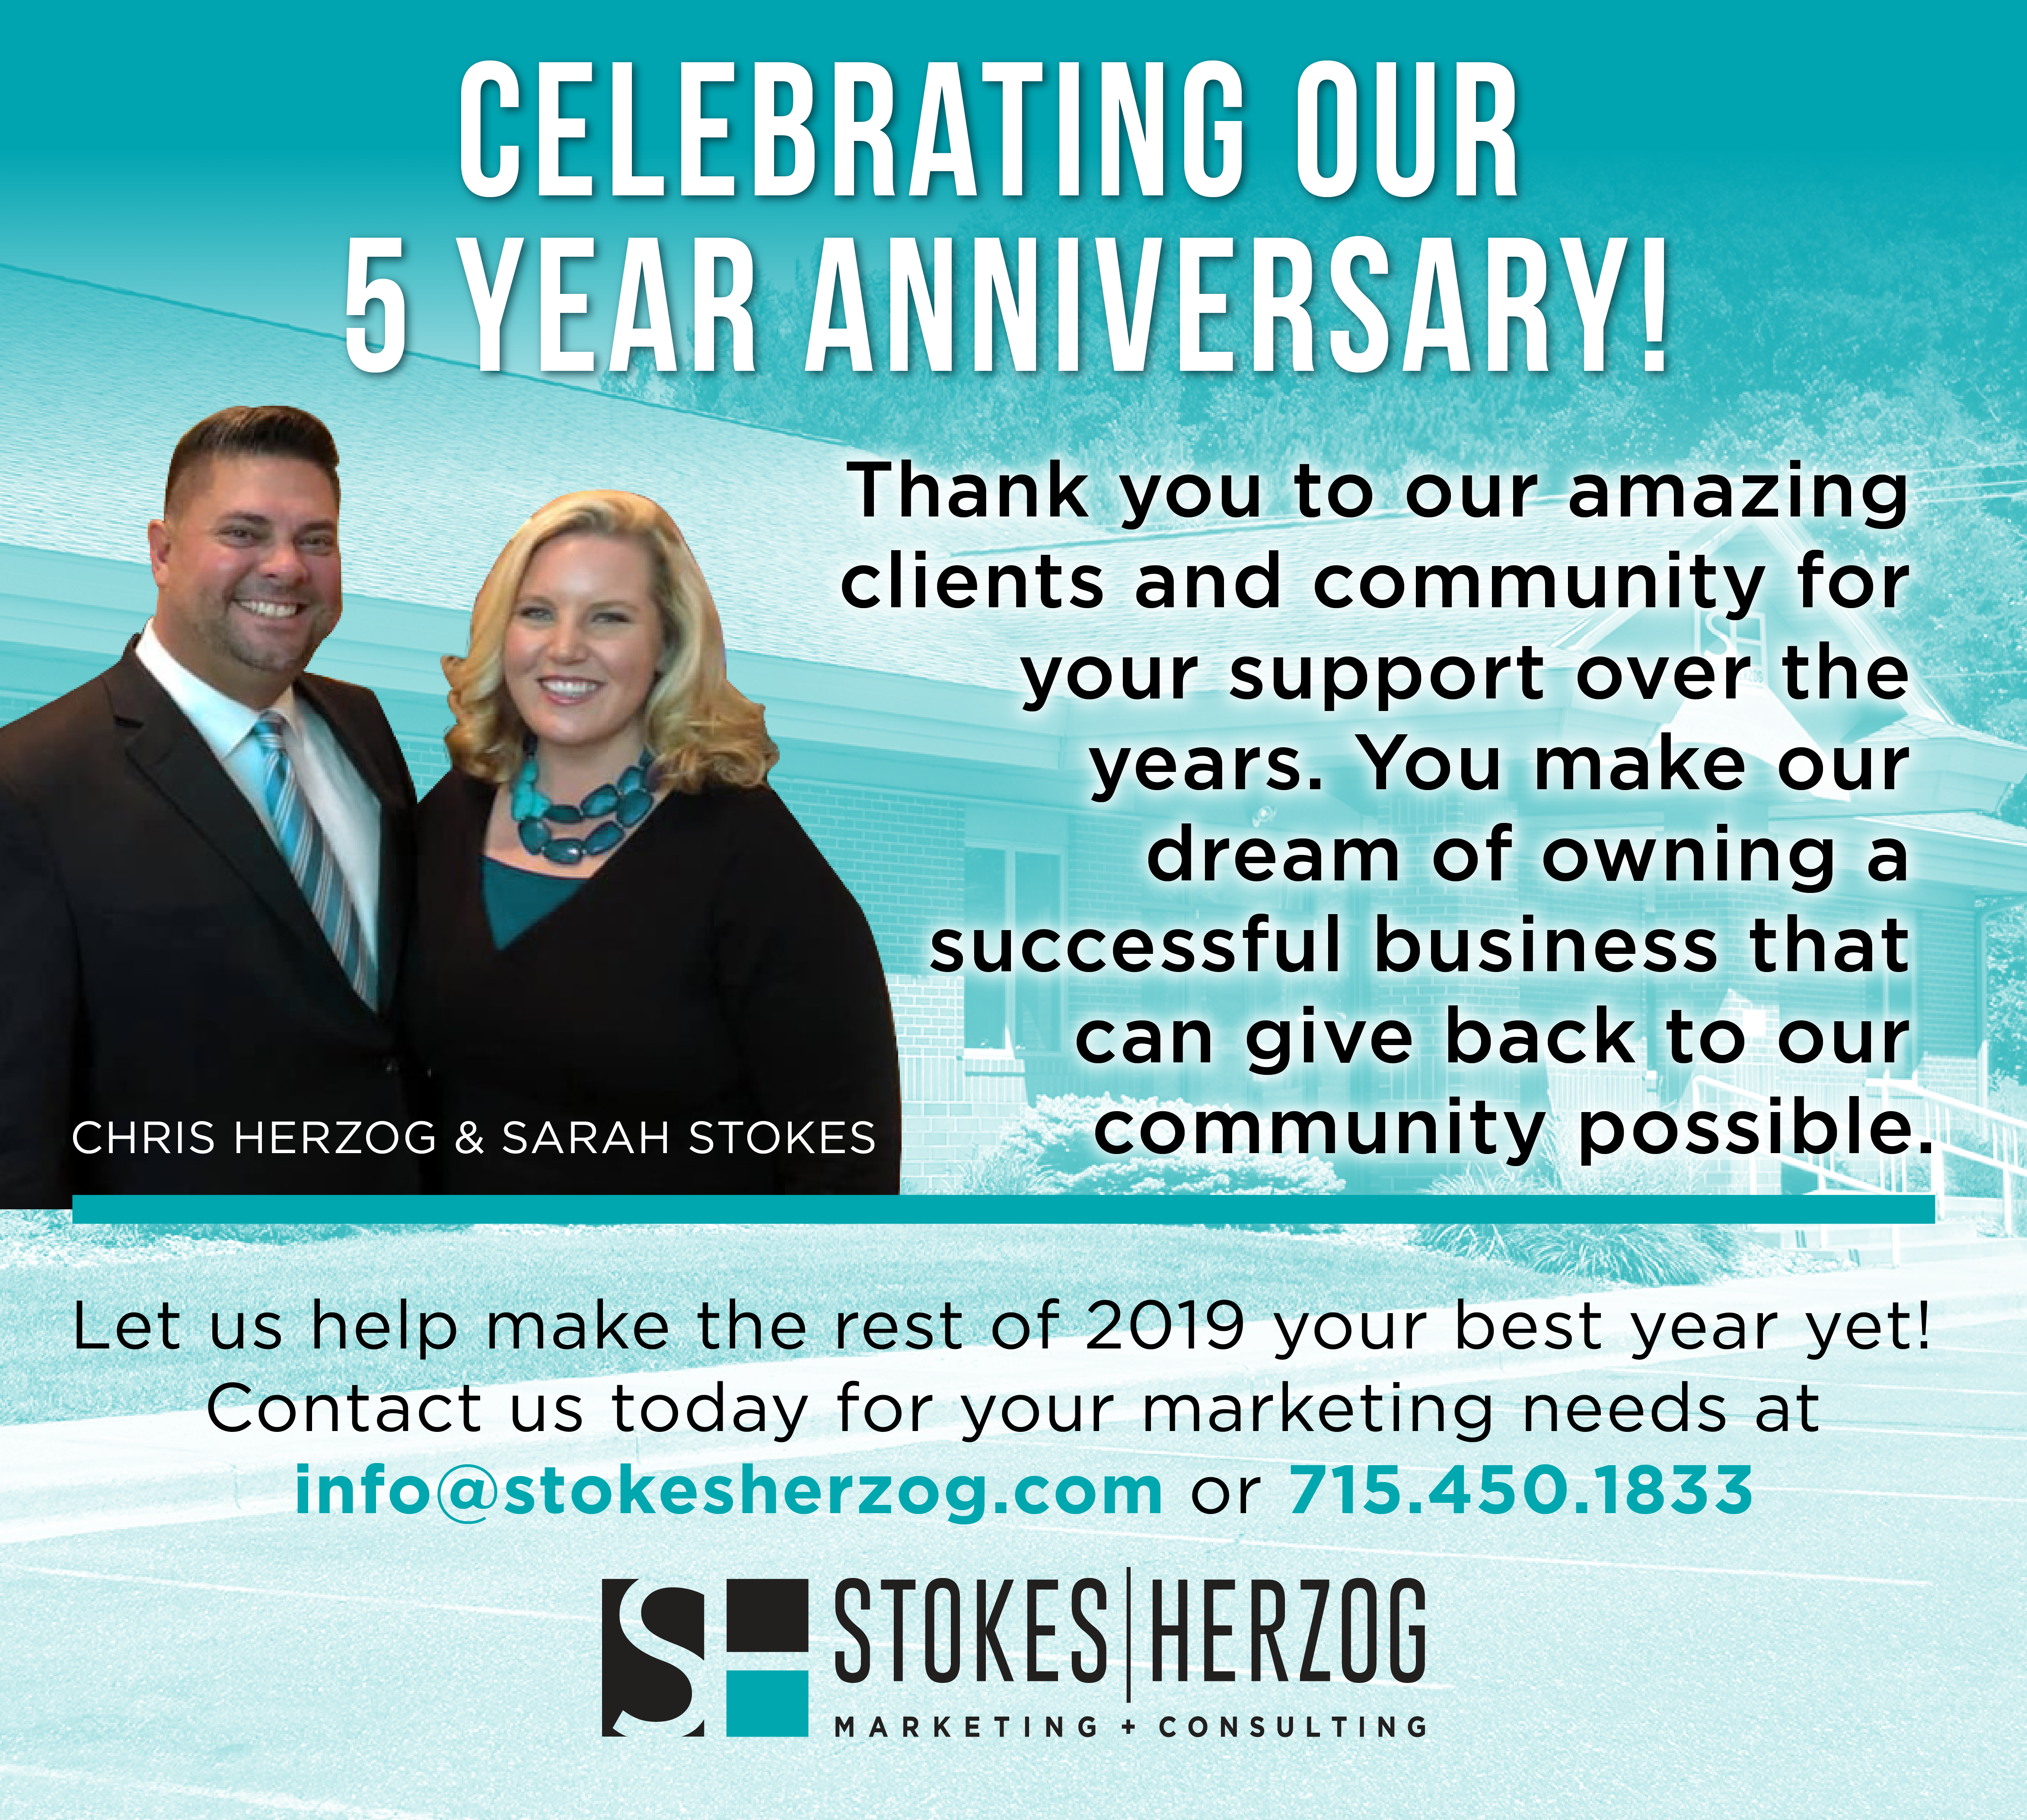 STOKES|HERZOG Marketing and Consulting